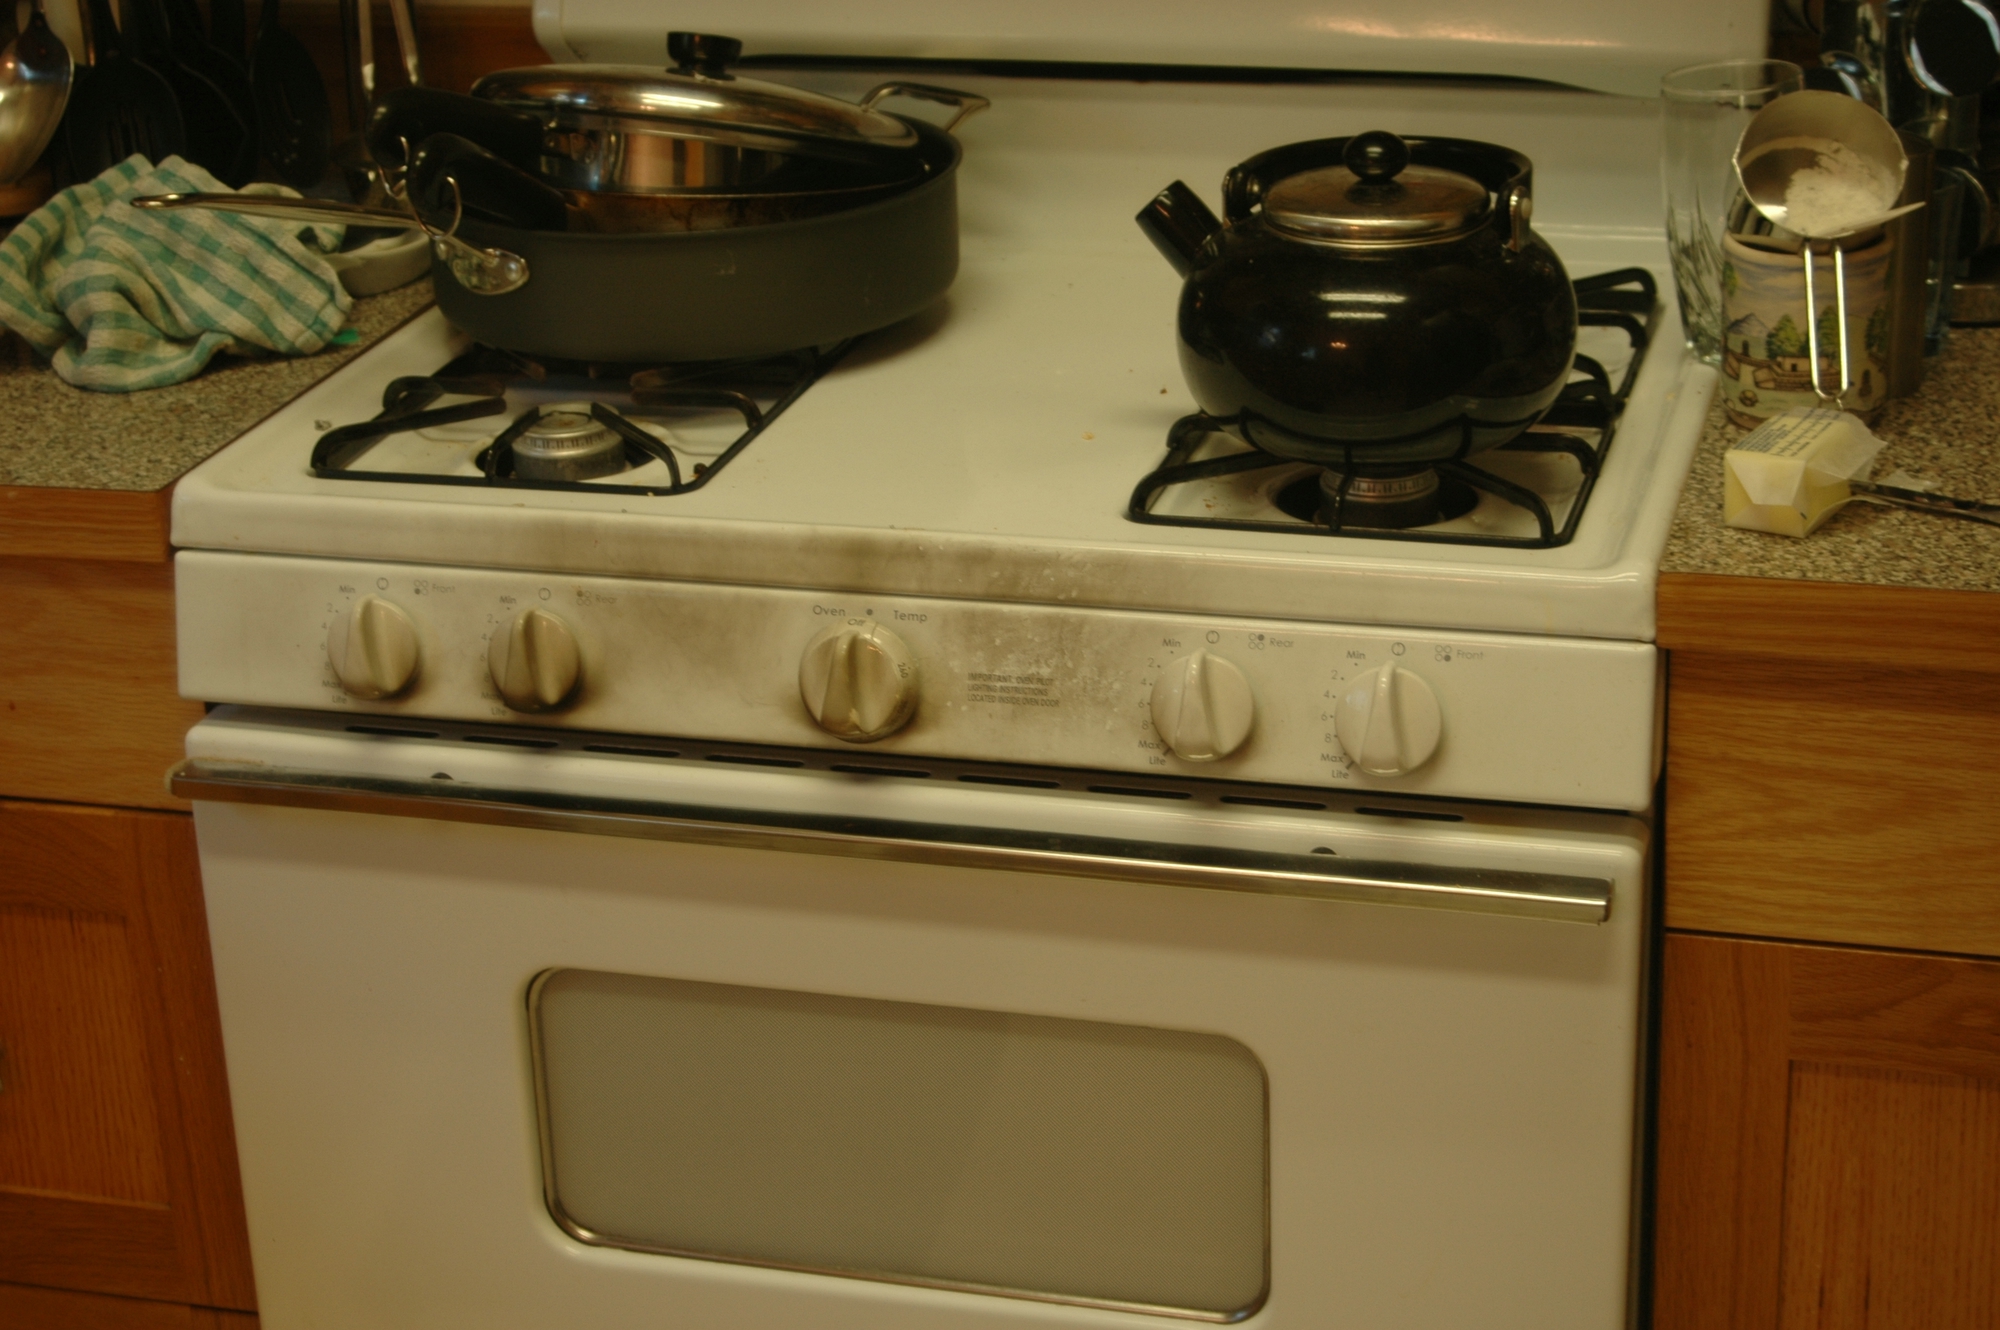 an image of a stove with pots on it